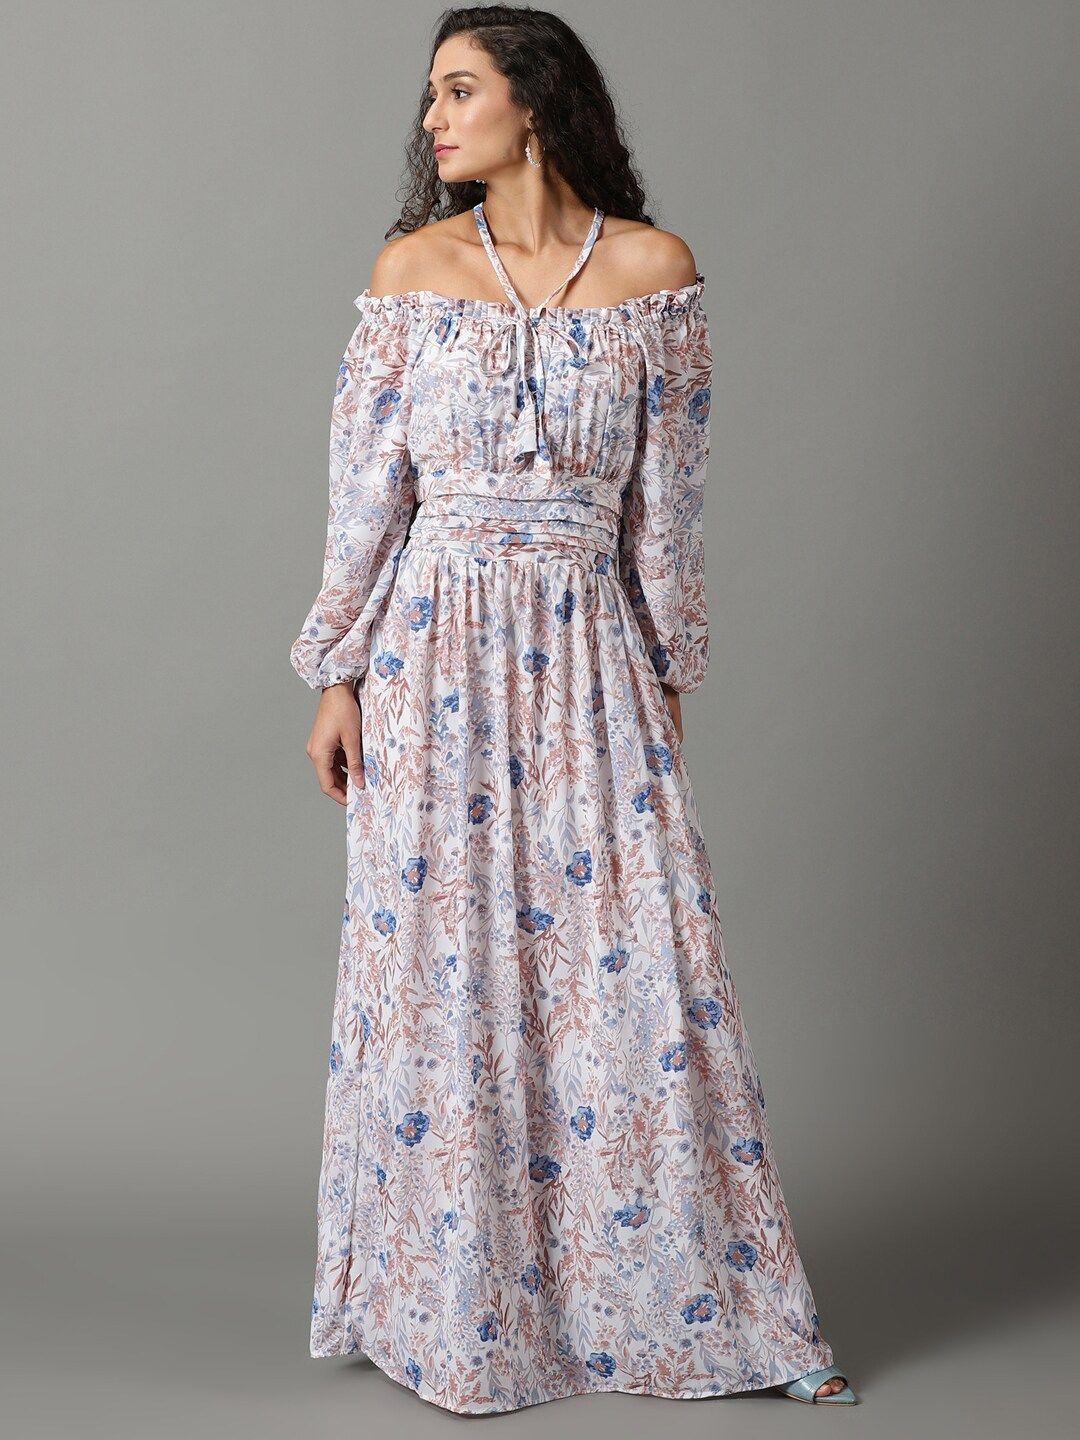 SHOWOFF Floral Printed Off-Shoulder Puff Sleeves Gathered Fit & Flare Maxi Dress